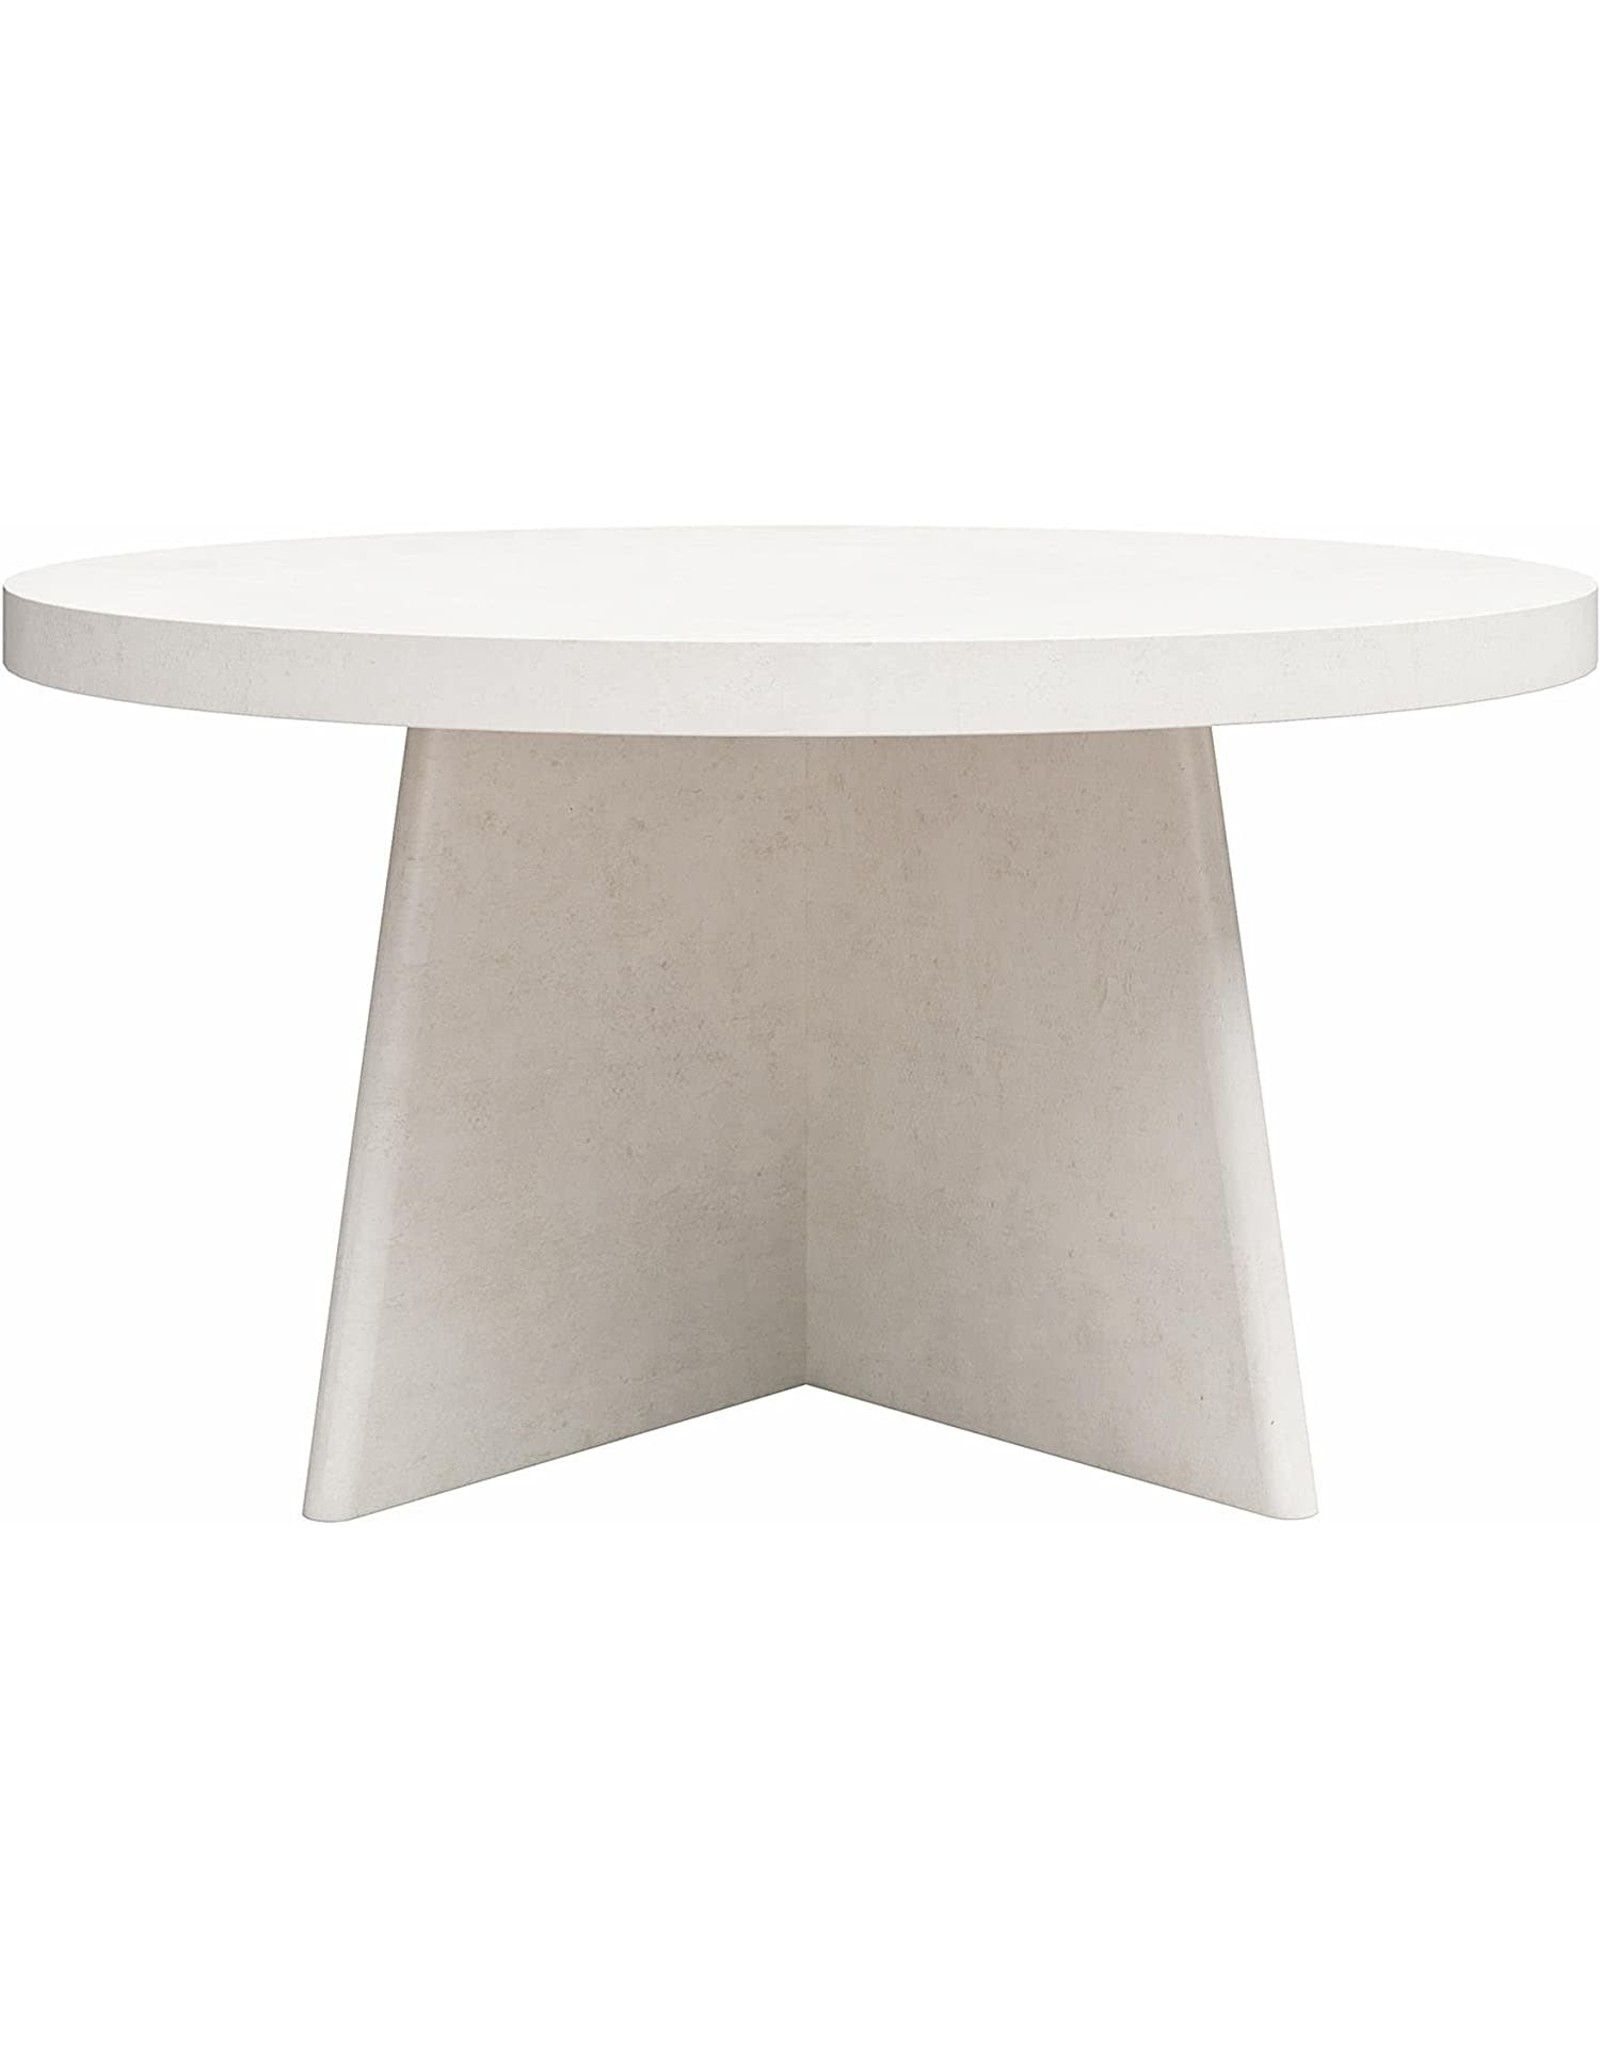 Ksoijor Liam Round Coffee Table, Plaster – Amazing Bargains Usa Within Liam Round Plaster Coffee Tables (View 2 of 20)